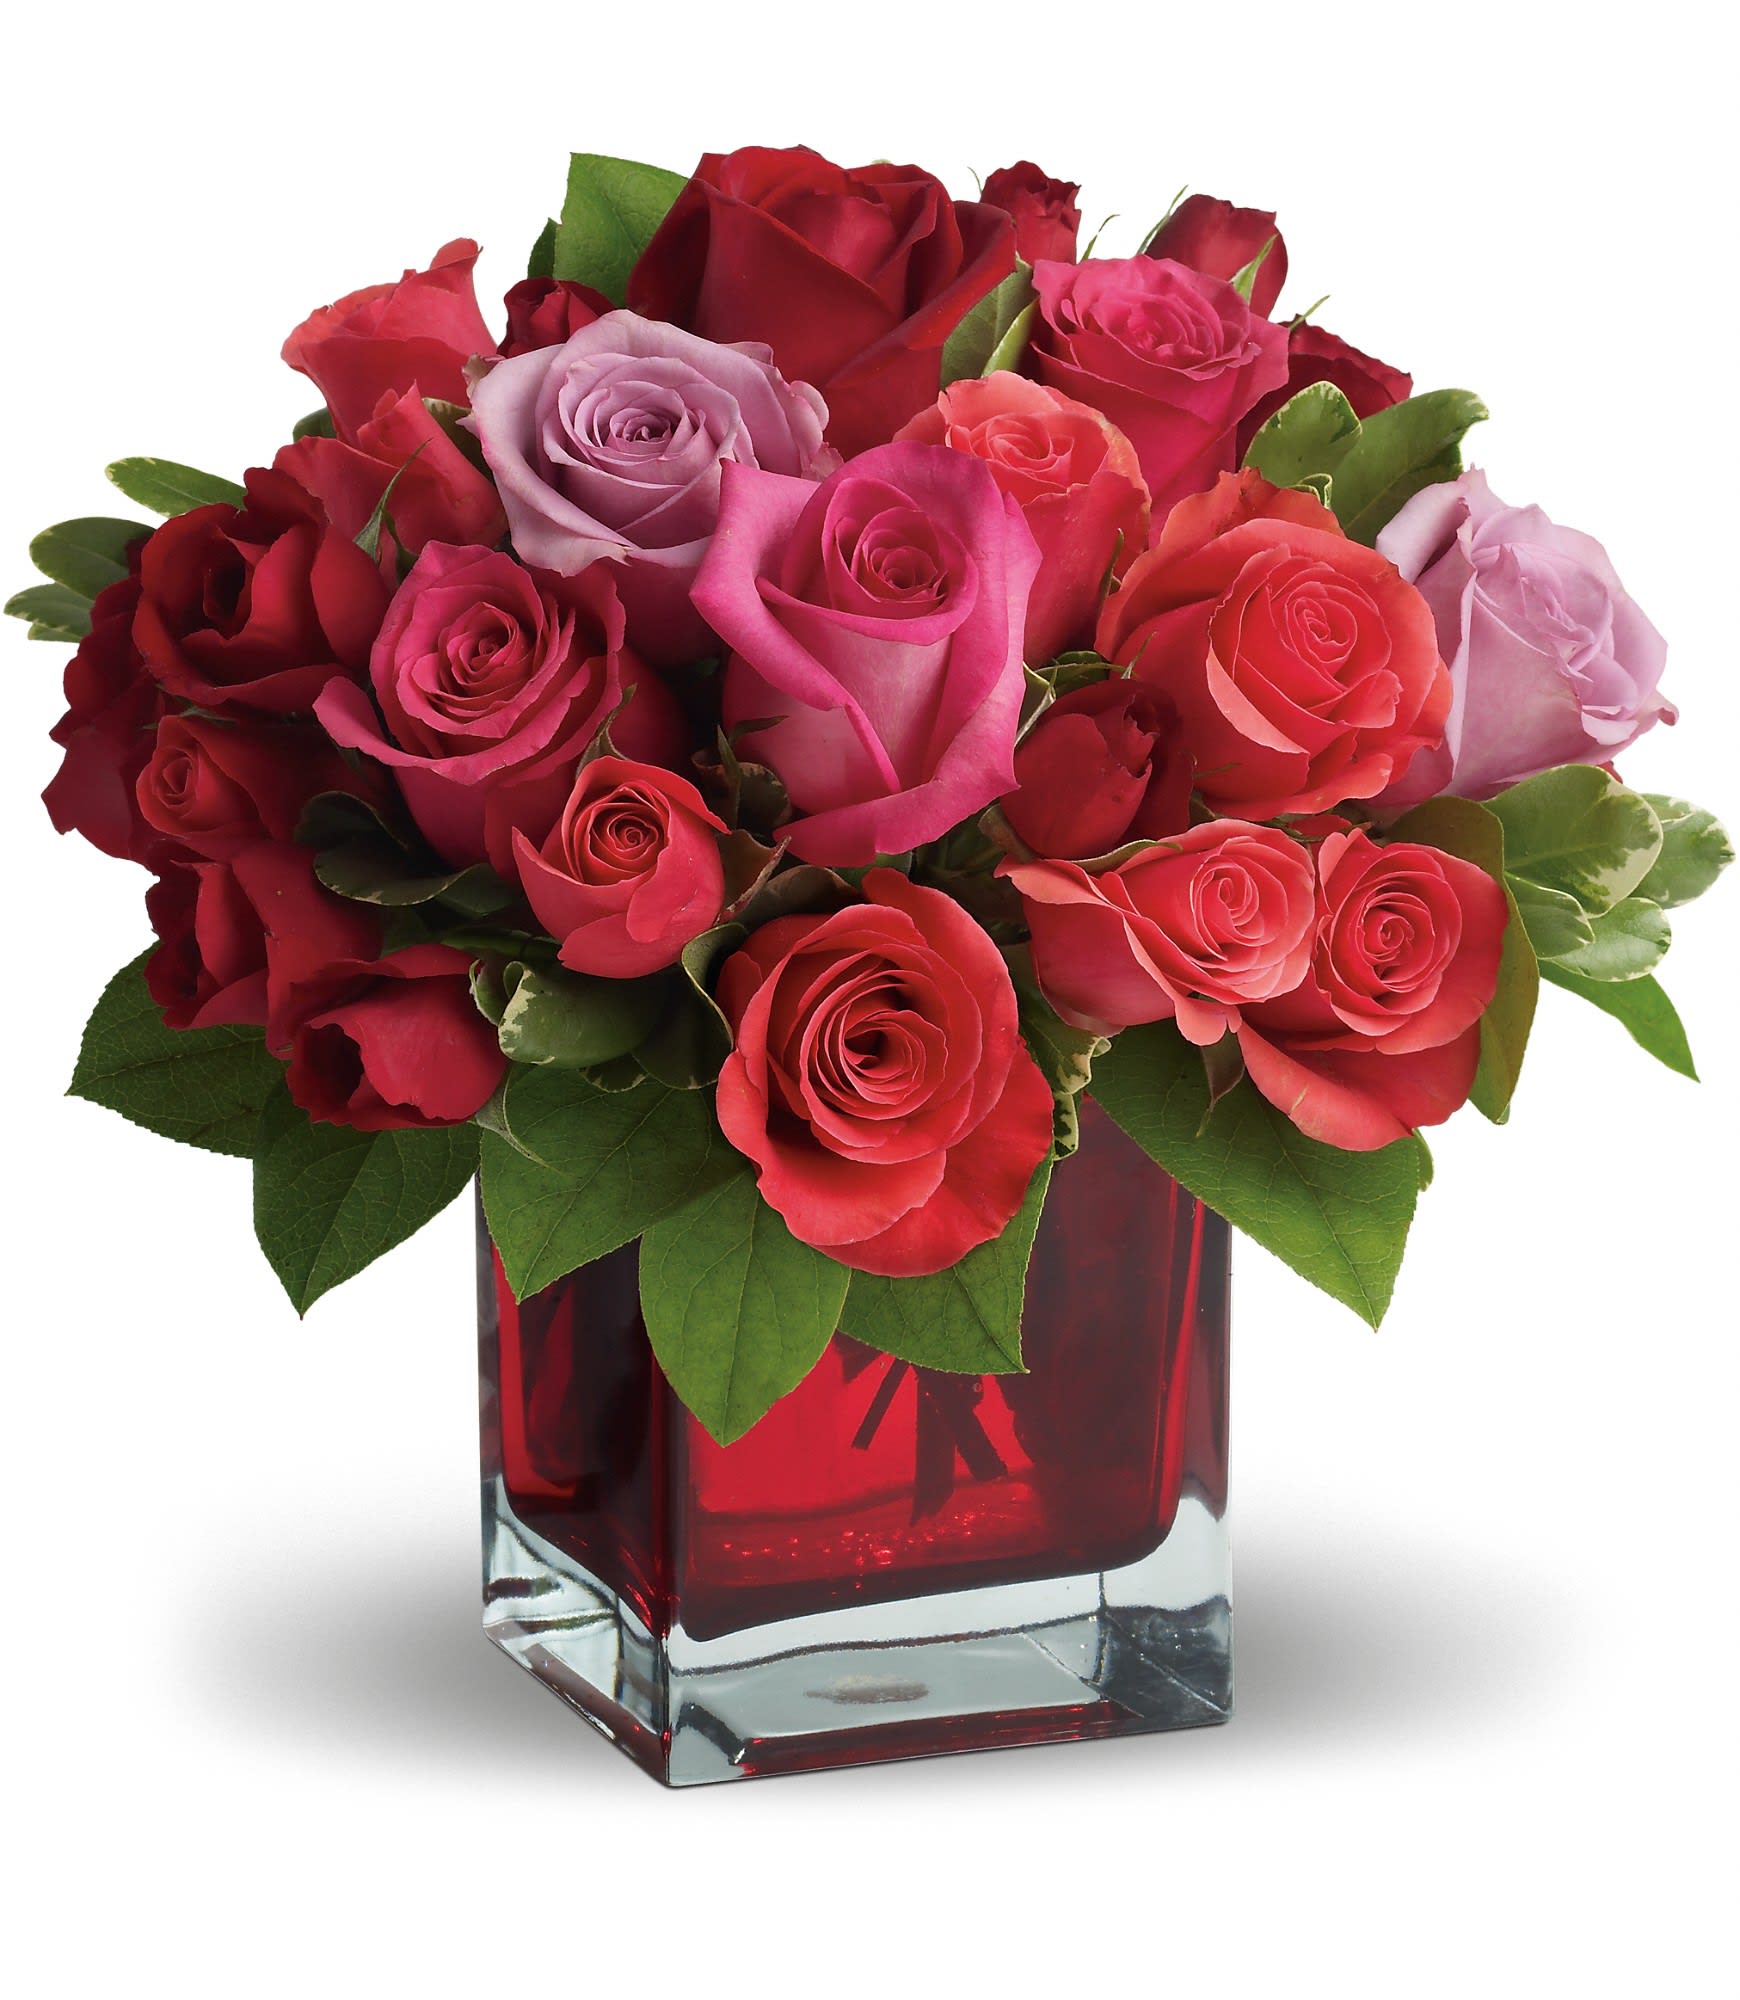 Madly in Love Bouquet with Red Roses by Teleflora - If you're crazy about someone and not afraid to show it, this bright jewel-toned arrangement is the perfect way to express your love.    Lavender, red and hot pink roses along with coral and red spray roses arranged in a red-hot cube vase are an absolutely beautiful way to get your message across.    Approximately 11&quot; W x 10&quot; H    Orientation: All-Around    As Shown : T9-3A  Deluxe : T9-3B  Premium : T9-3C